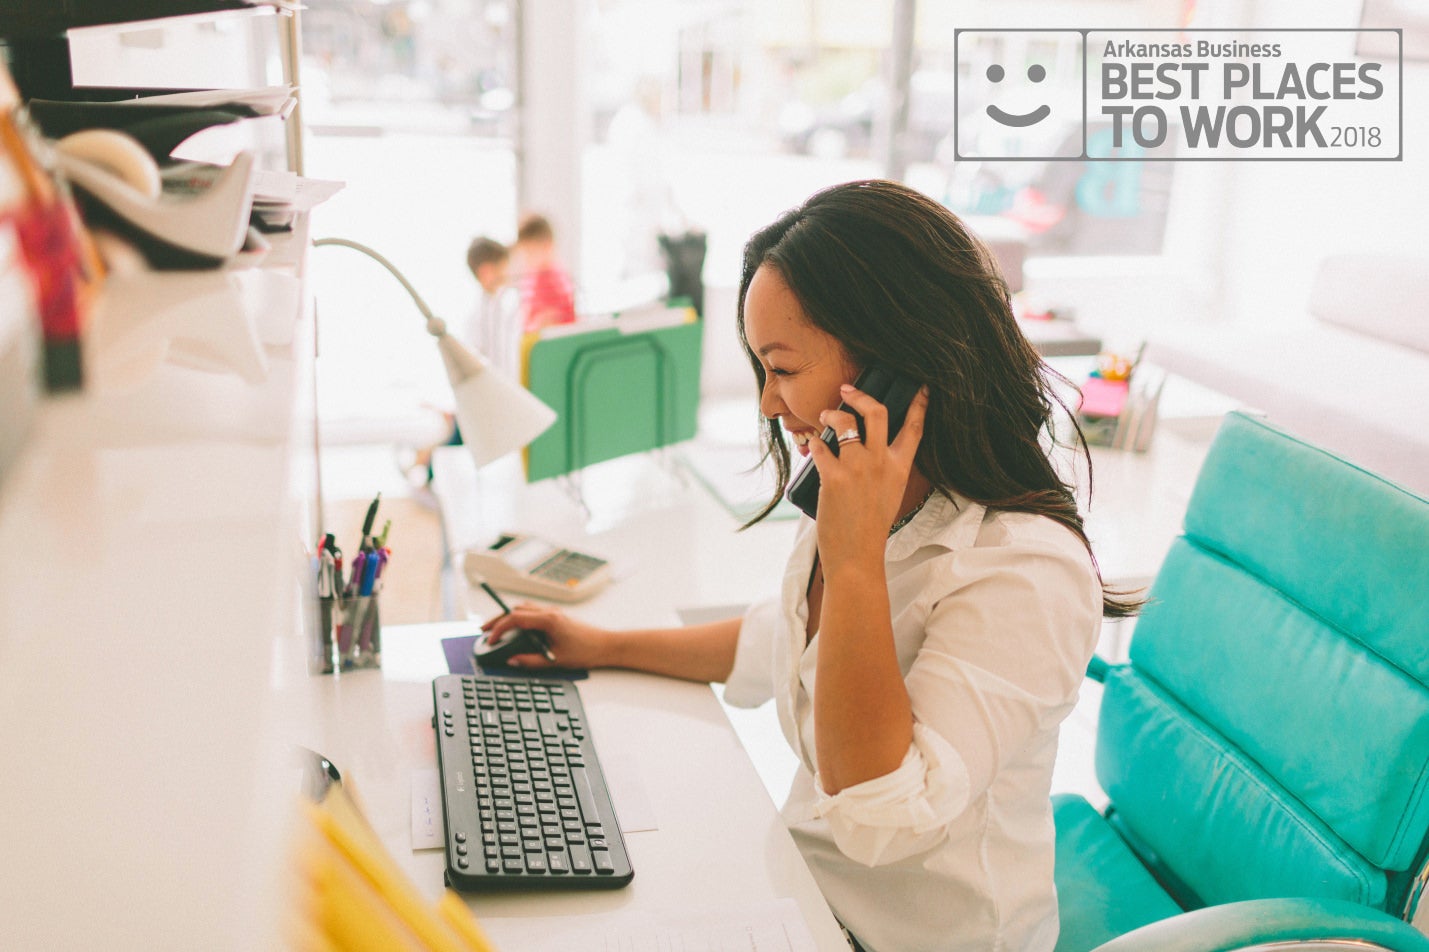 Women on a phone in front of a computer, Arkansas Business Best Places to Work 2018